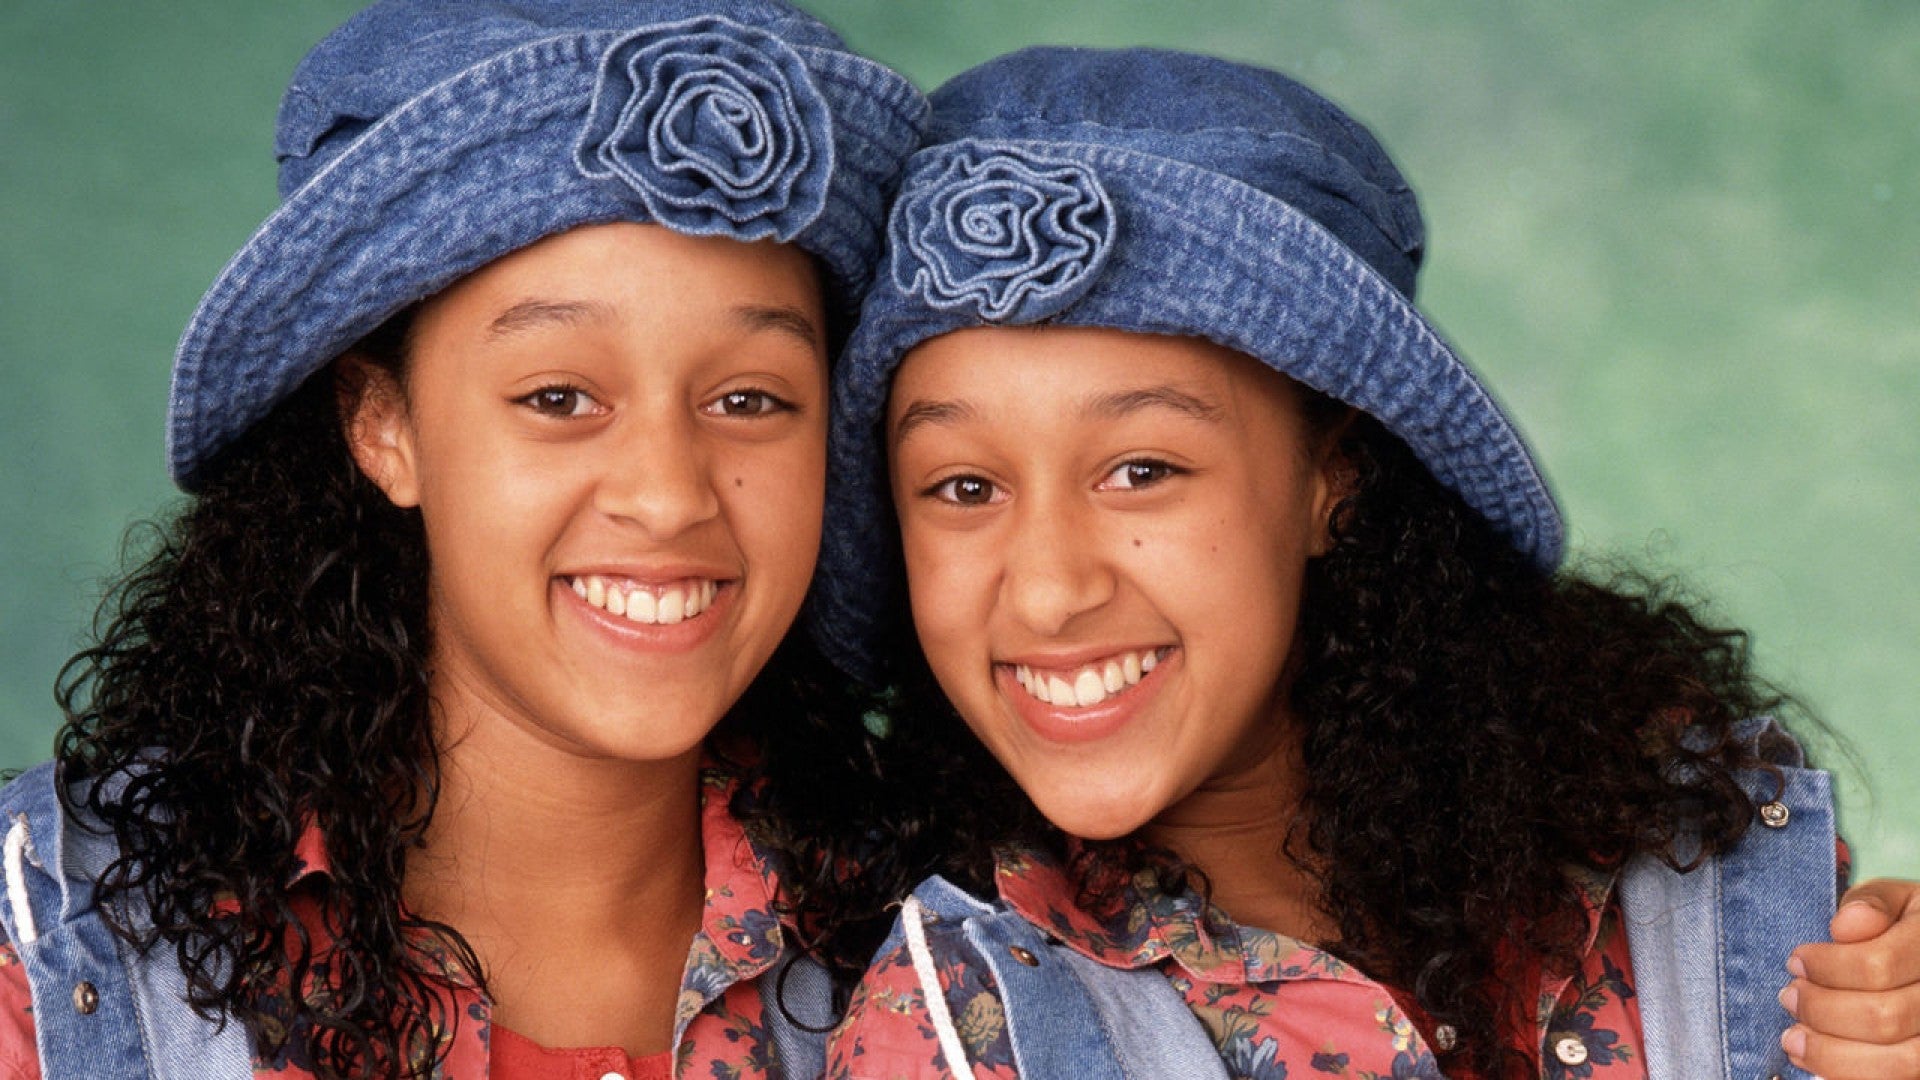 Tamera Mowry Says 'Sister, Sister' Inspired Her Children to Act